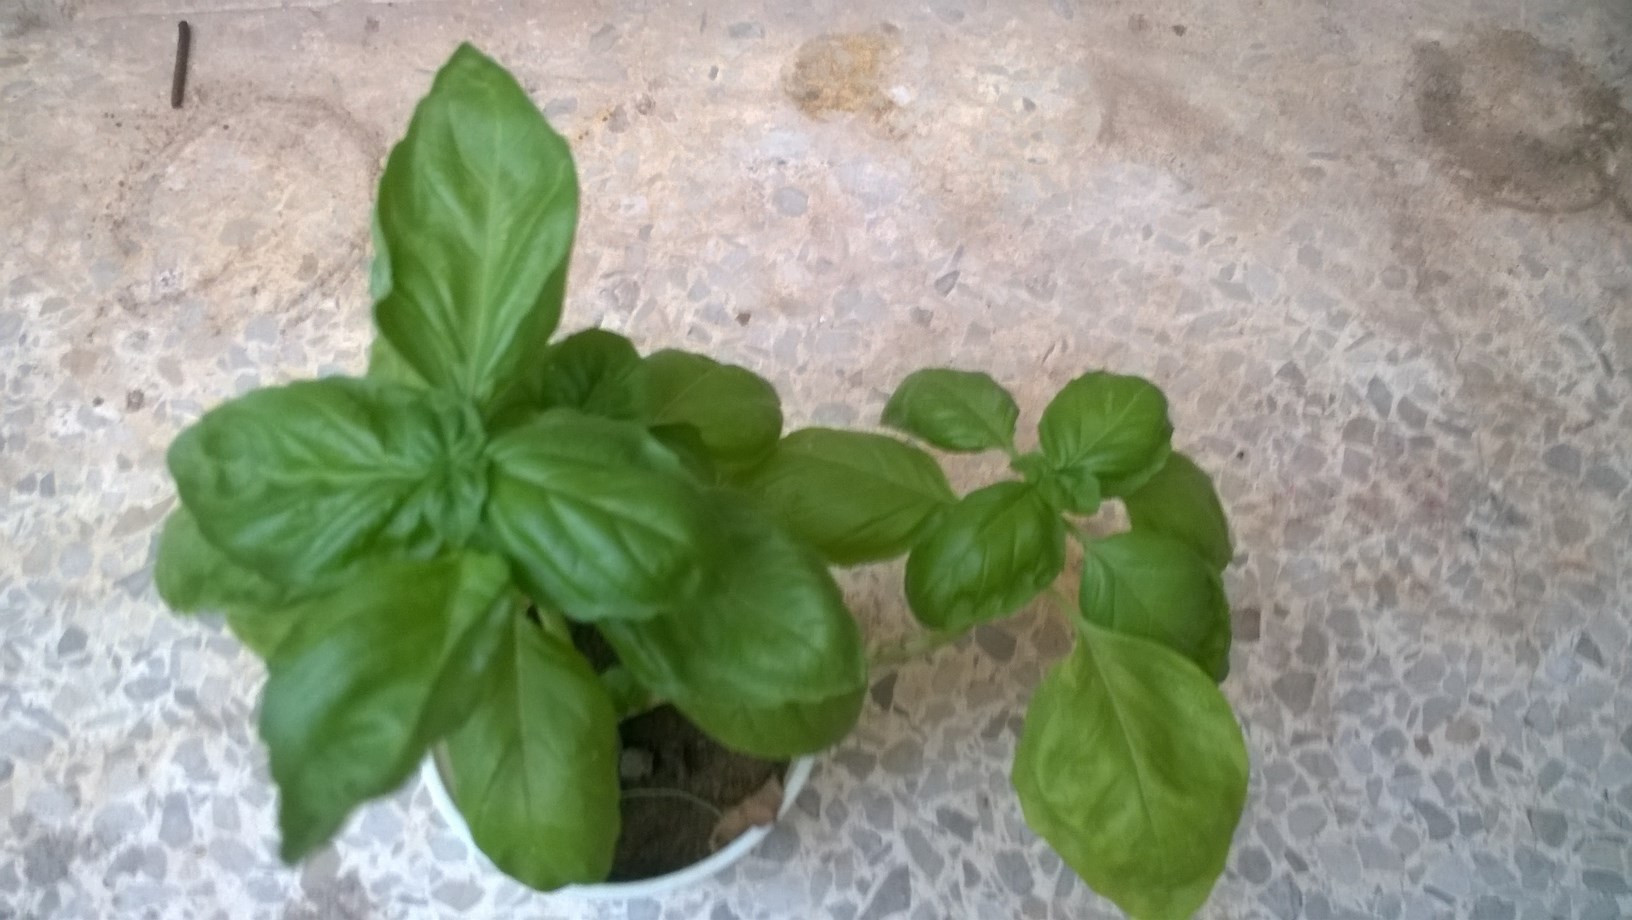 my basil seedling is ready to take place in my organic garden